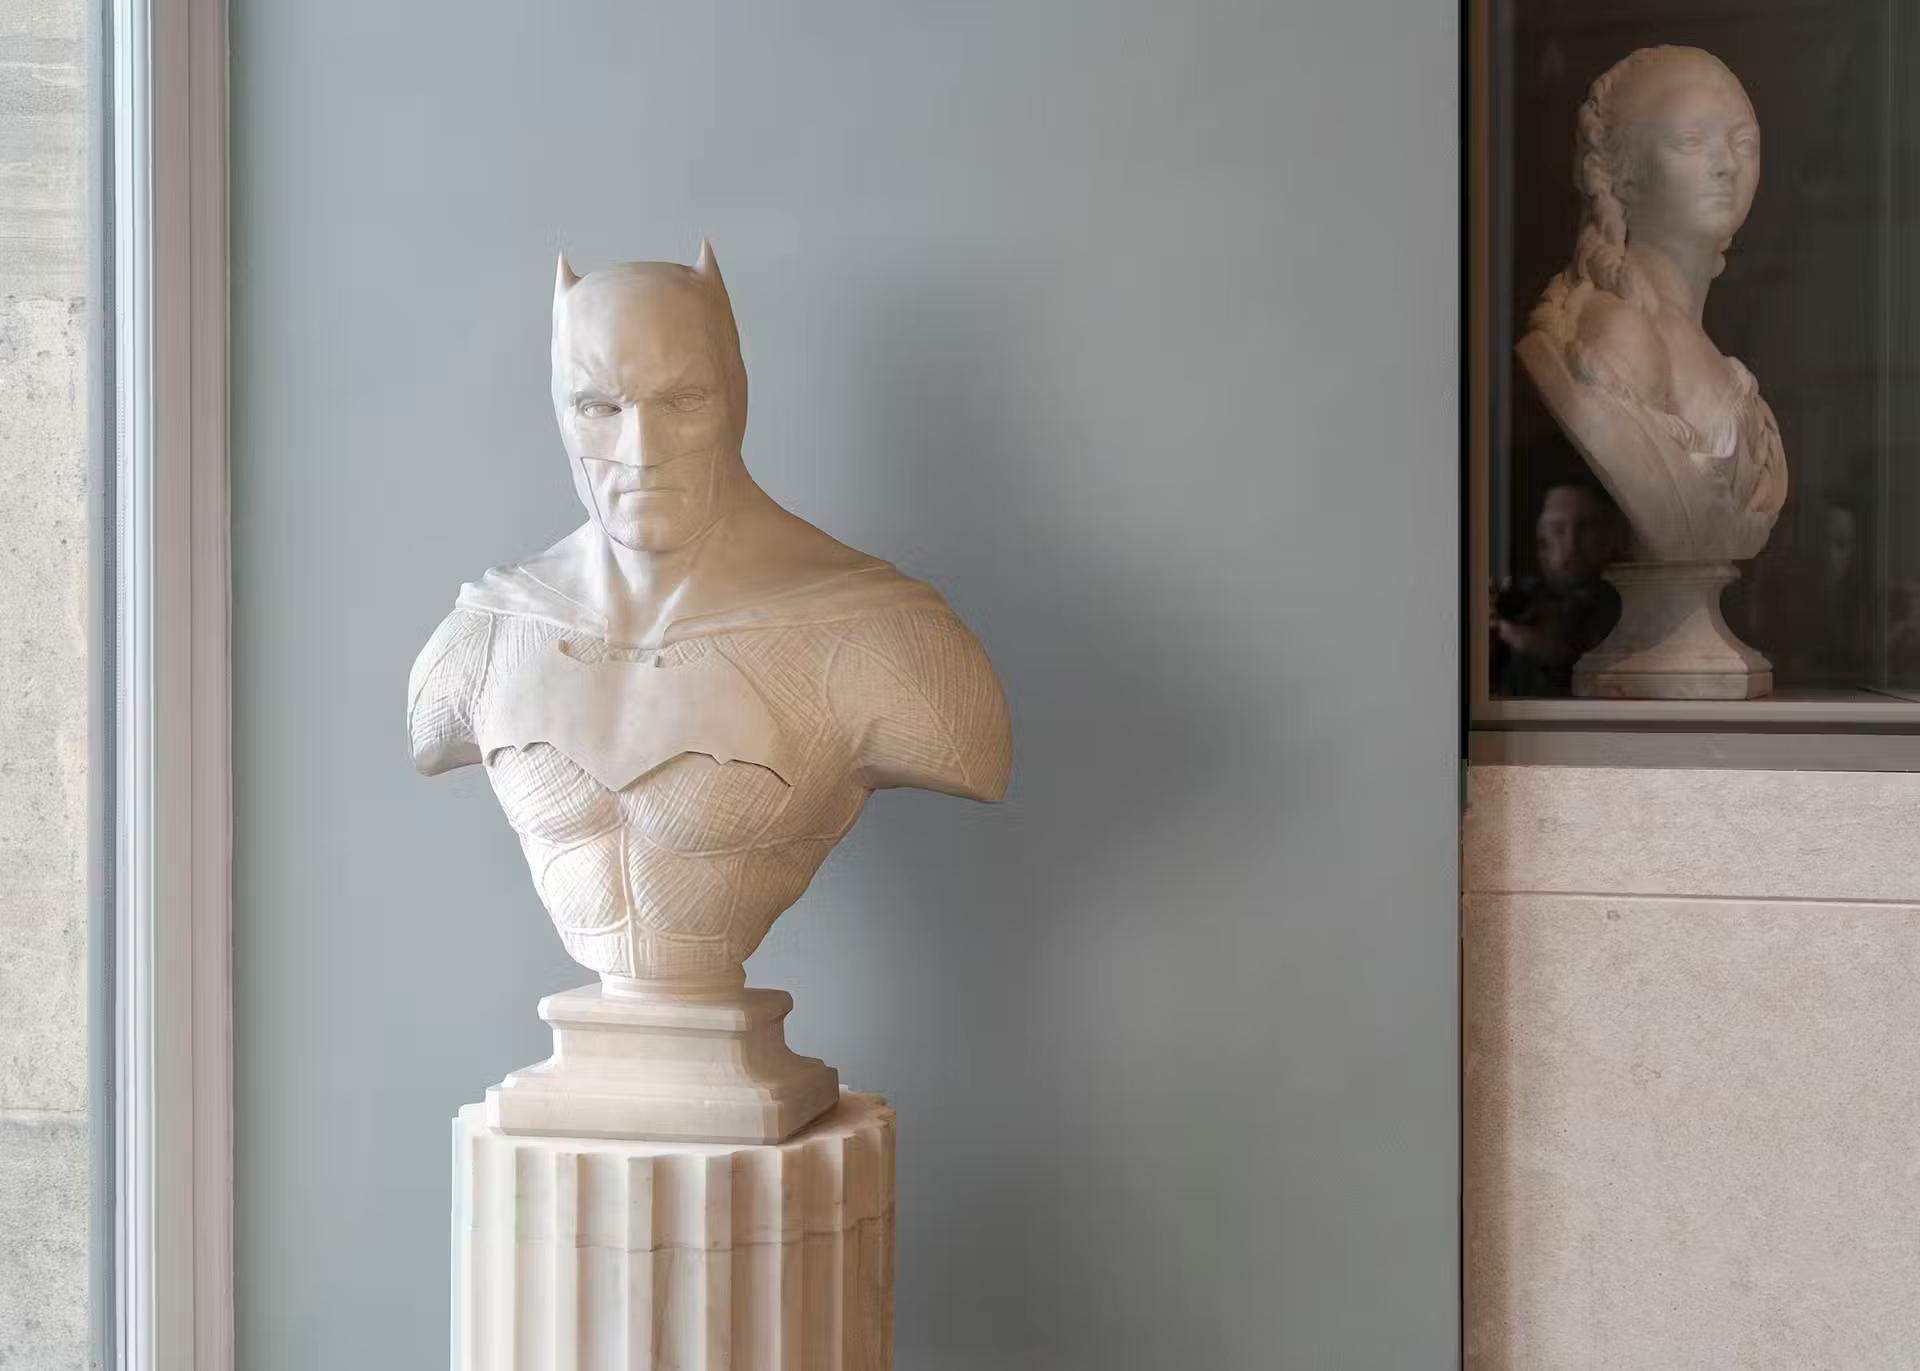 Heroes of Stone sees Leo creating images of superheroes placed in a museum setting.